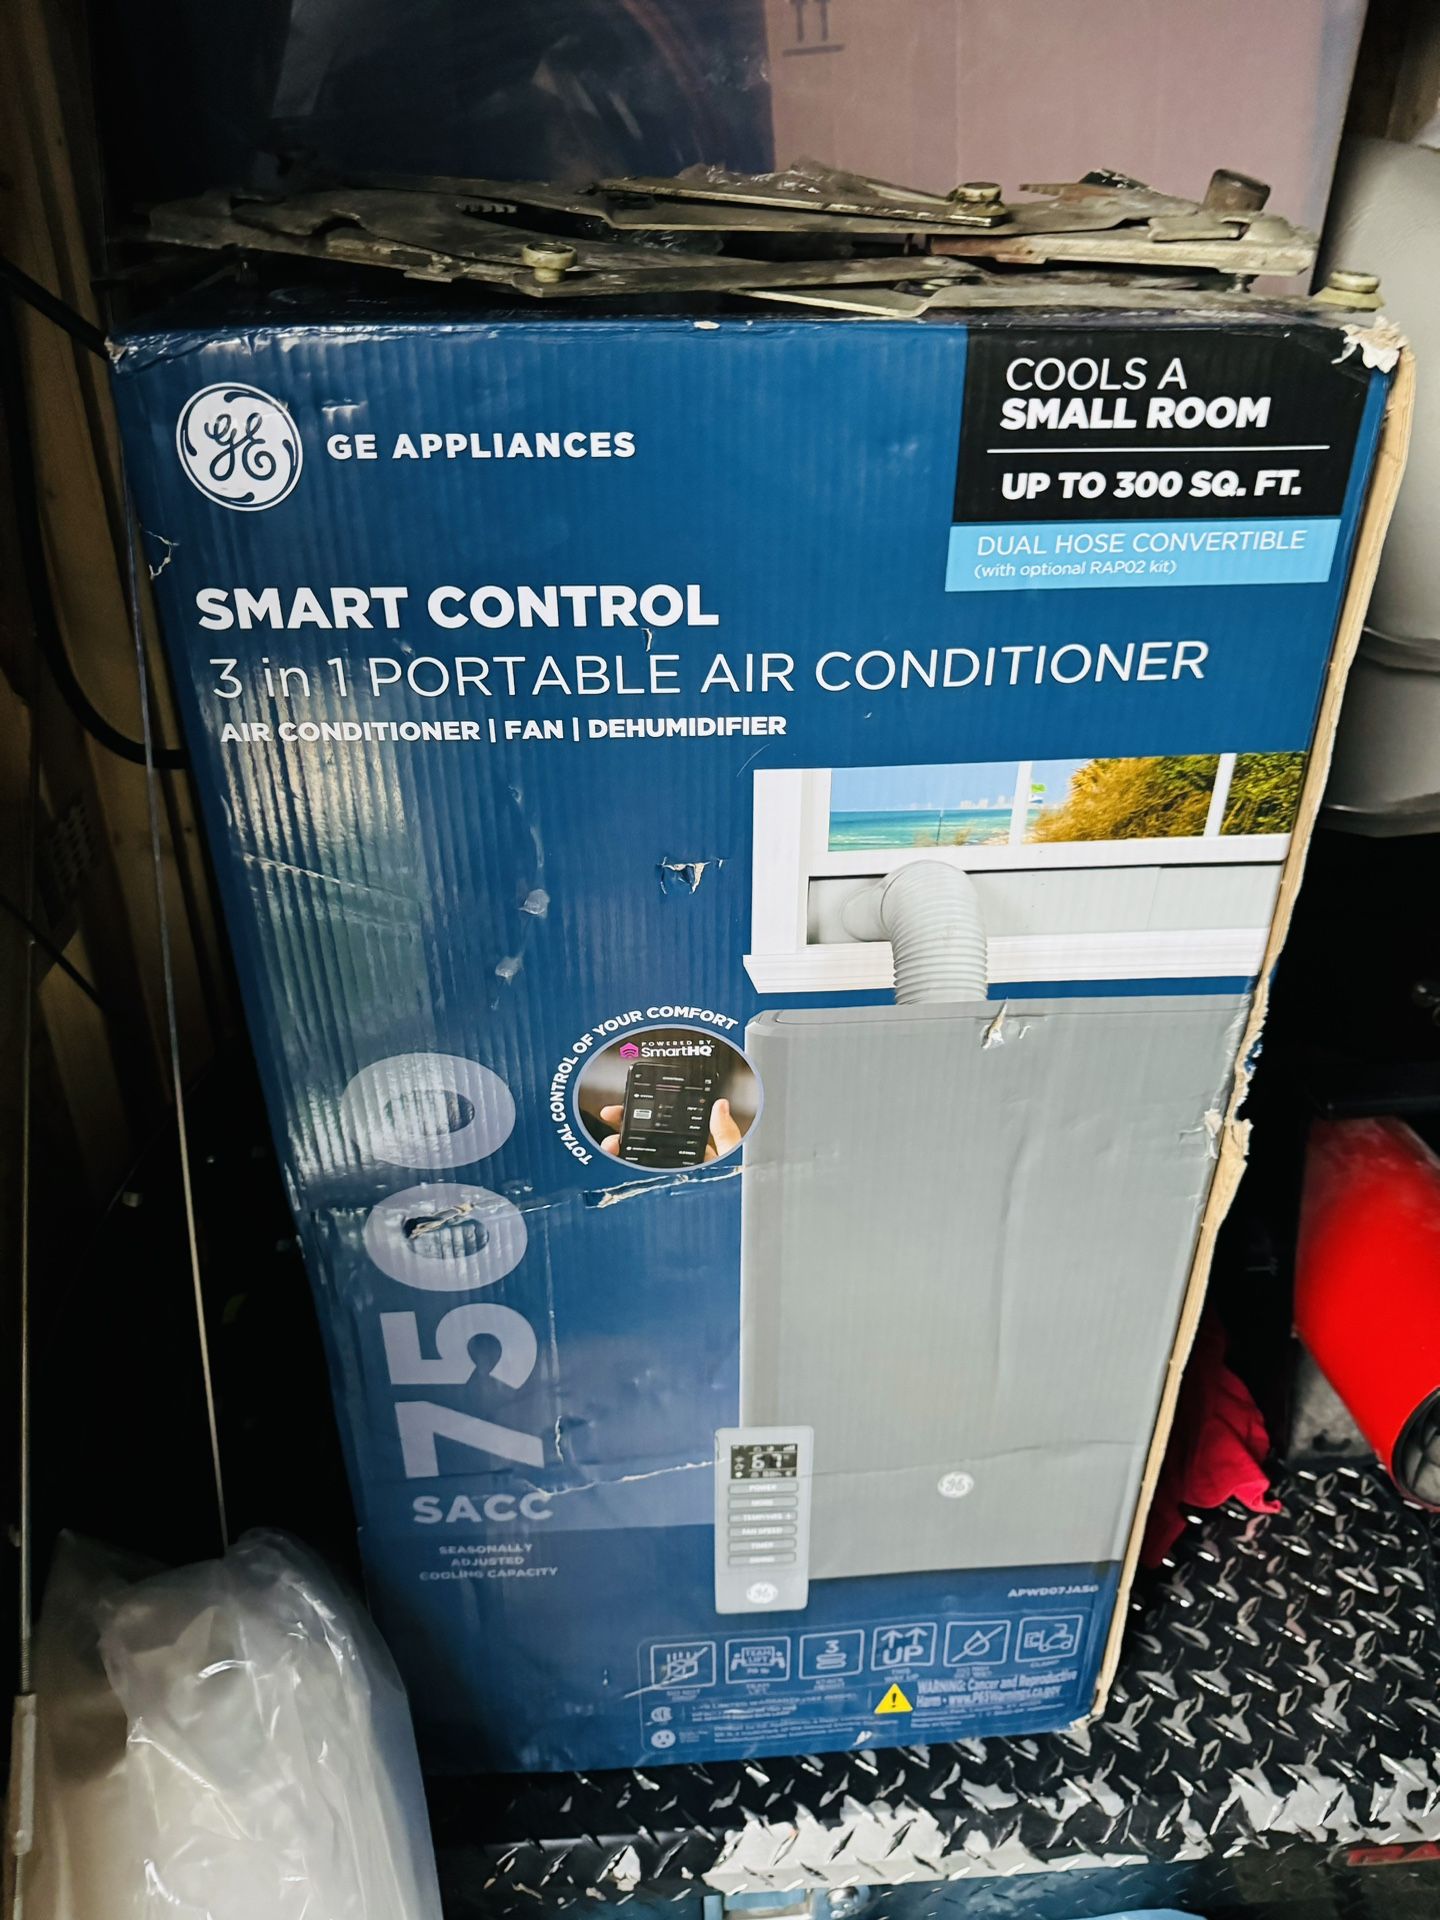 NEW PORTABLE AIR CONDITIONER 